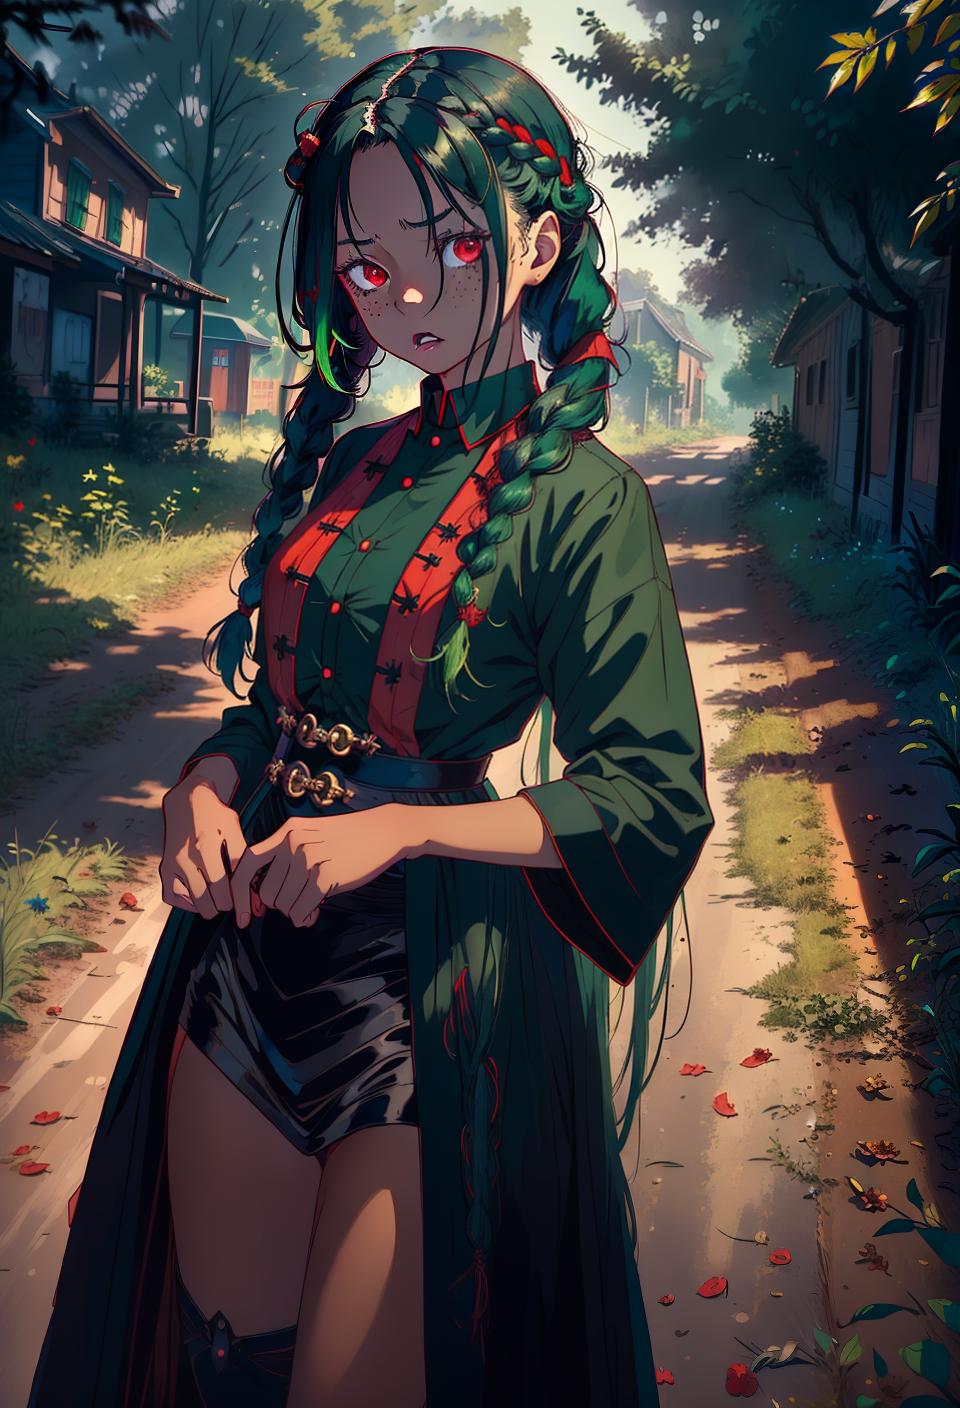  ((trending, highres, masterpiece, cinematic shot)), 1girl, young, female sorcerer outfit, country scene, very long messy dark green hair, hair in braids, large red eyes, evil personality, surprised expression, freckles, very dark skin, morbid, observant